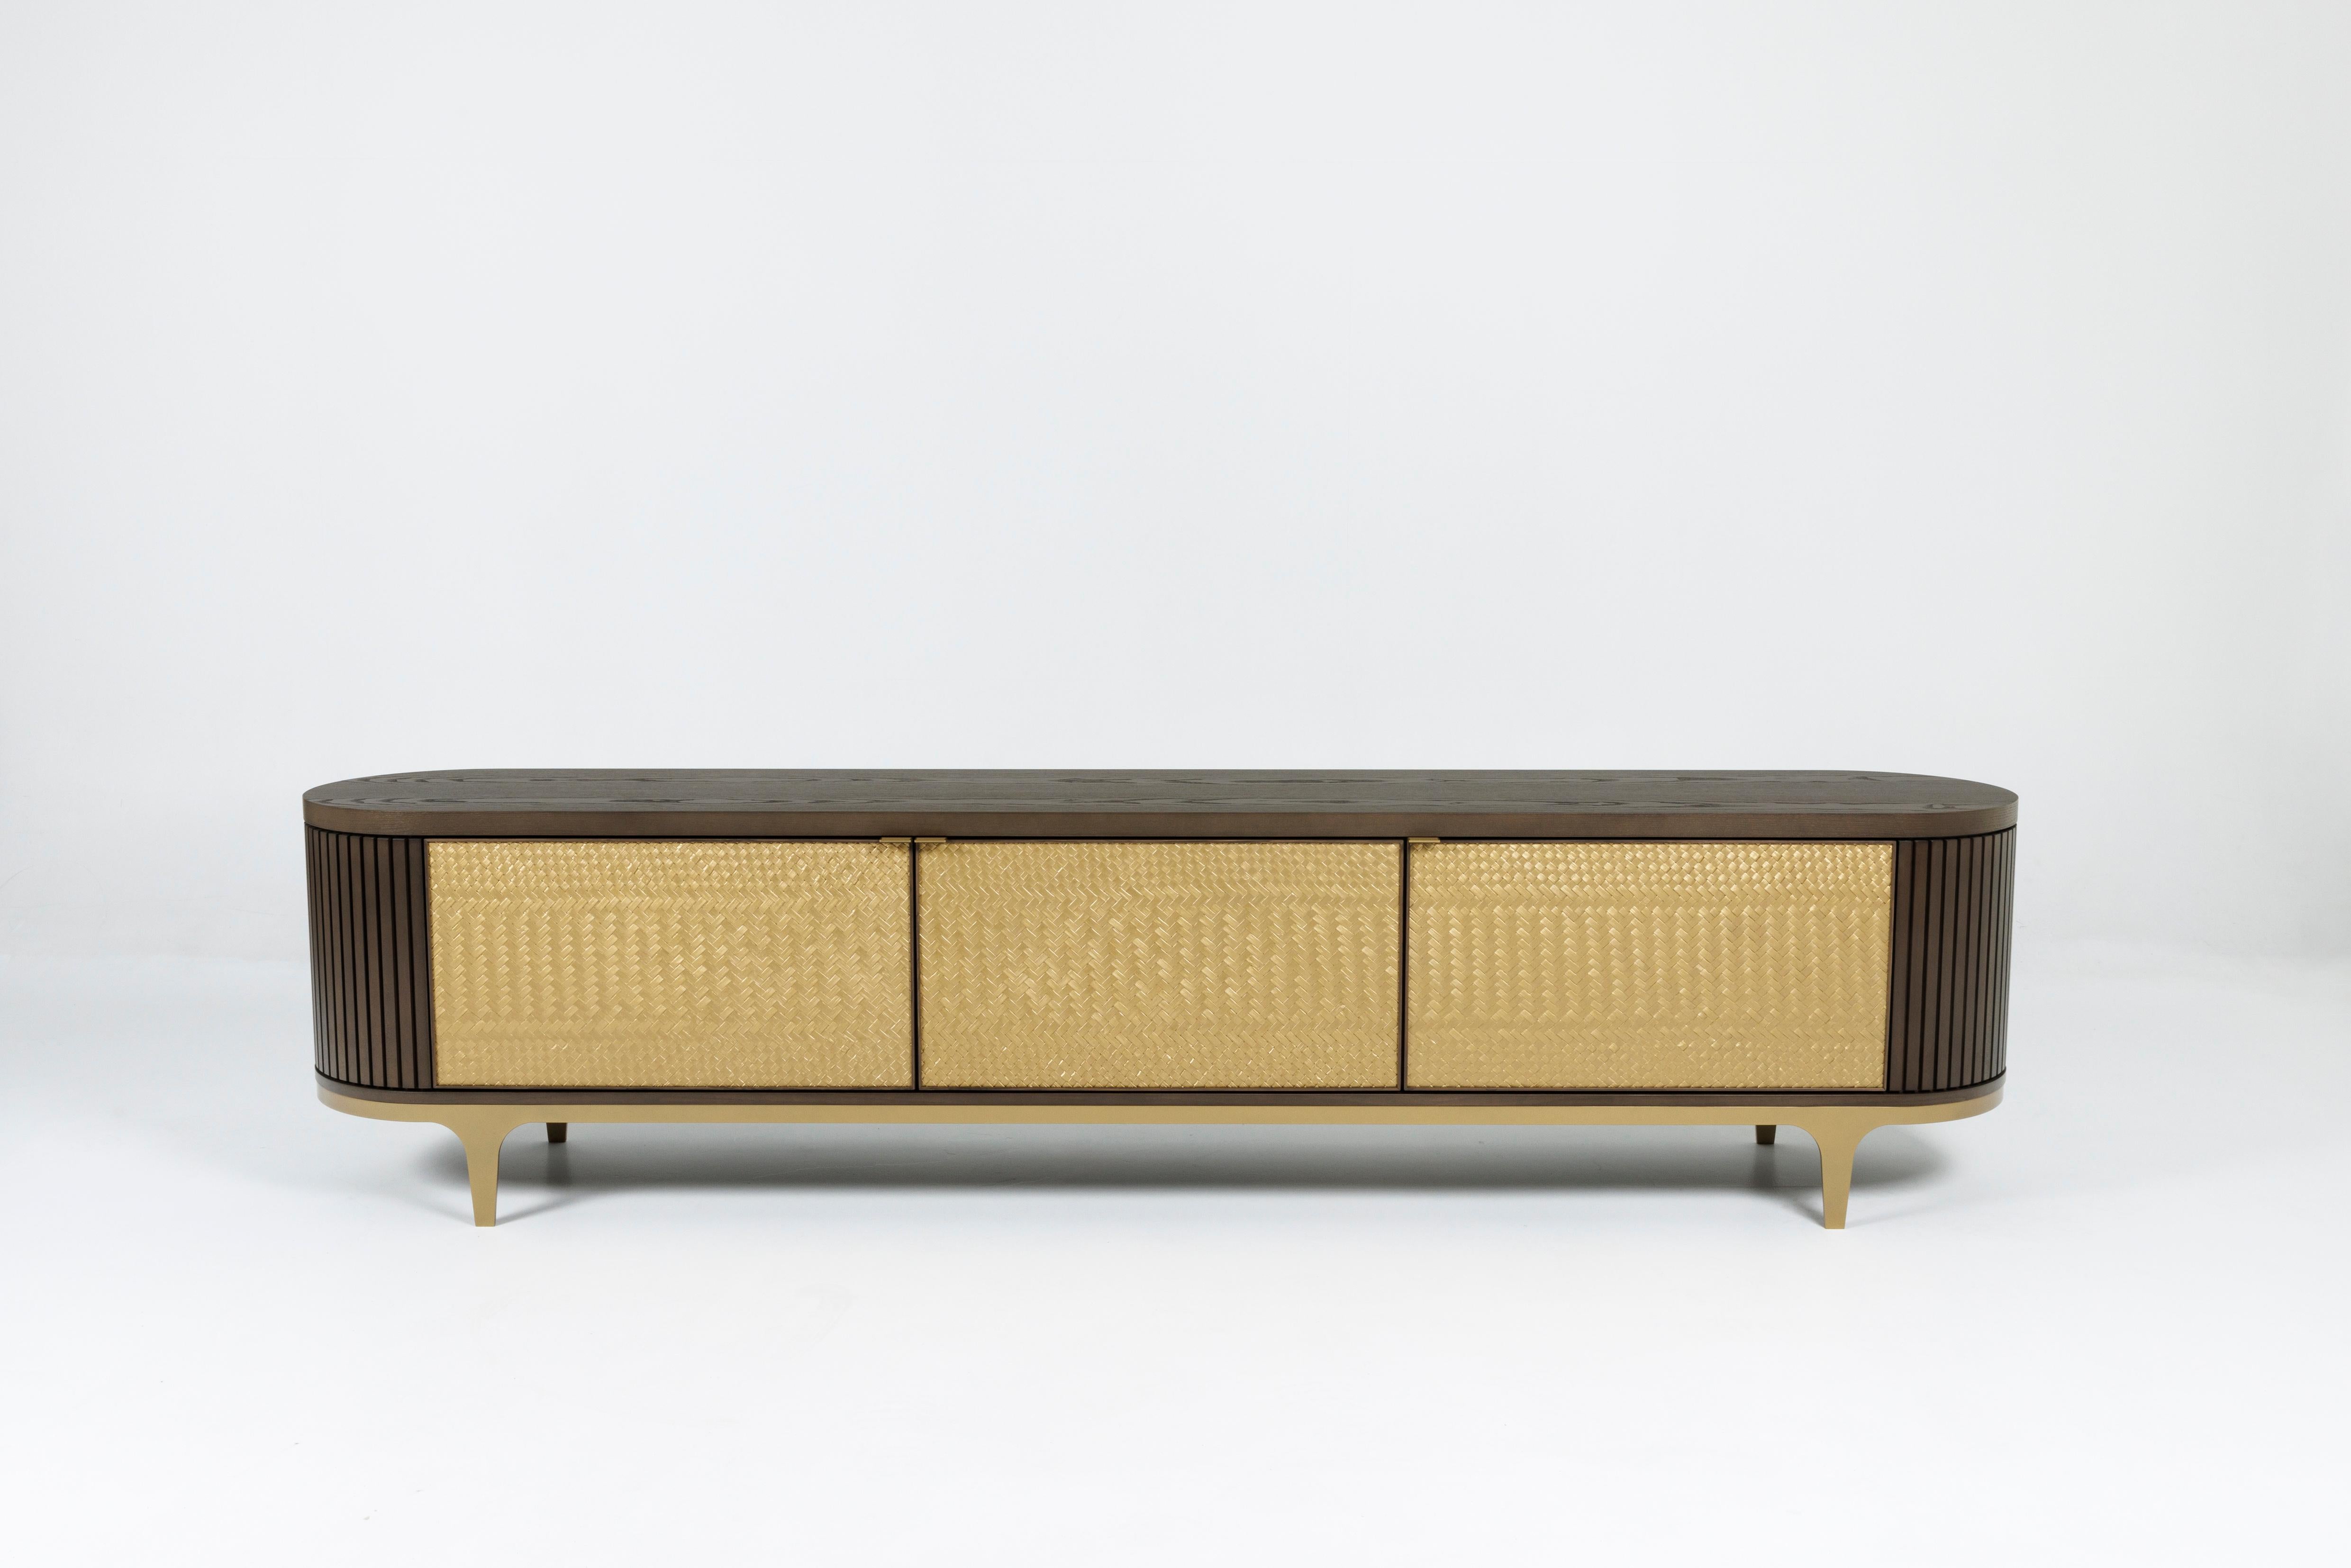 The Weave credenza combines traditional craftsmanship using wood and metal, with the skill and artistic form of three woven triptych panels created by Māori rāranga artist Bronwynn Billens, Ngati Tama, Te Atiawa, Te Arawa. The result is a